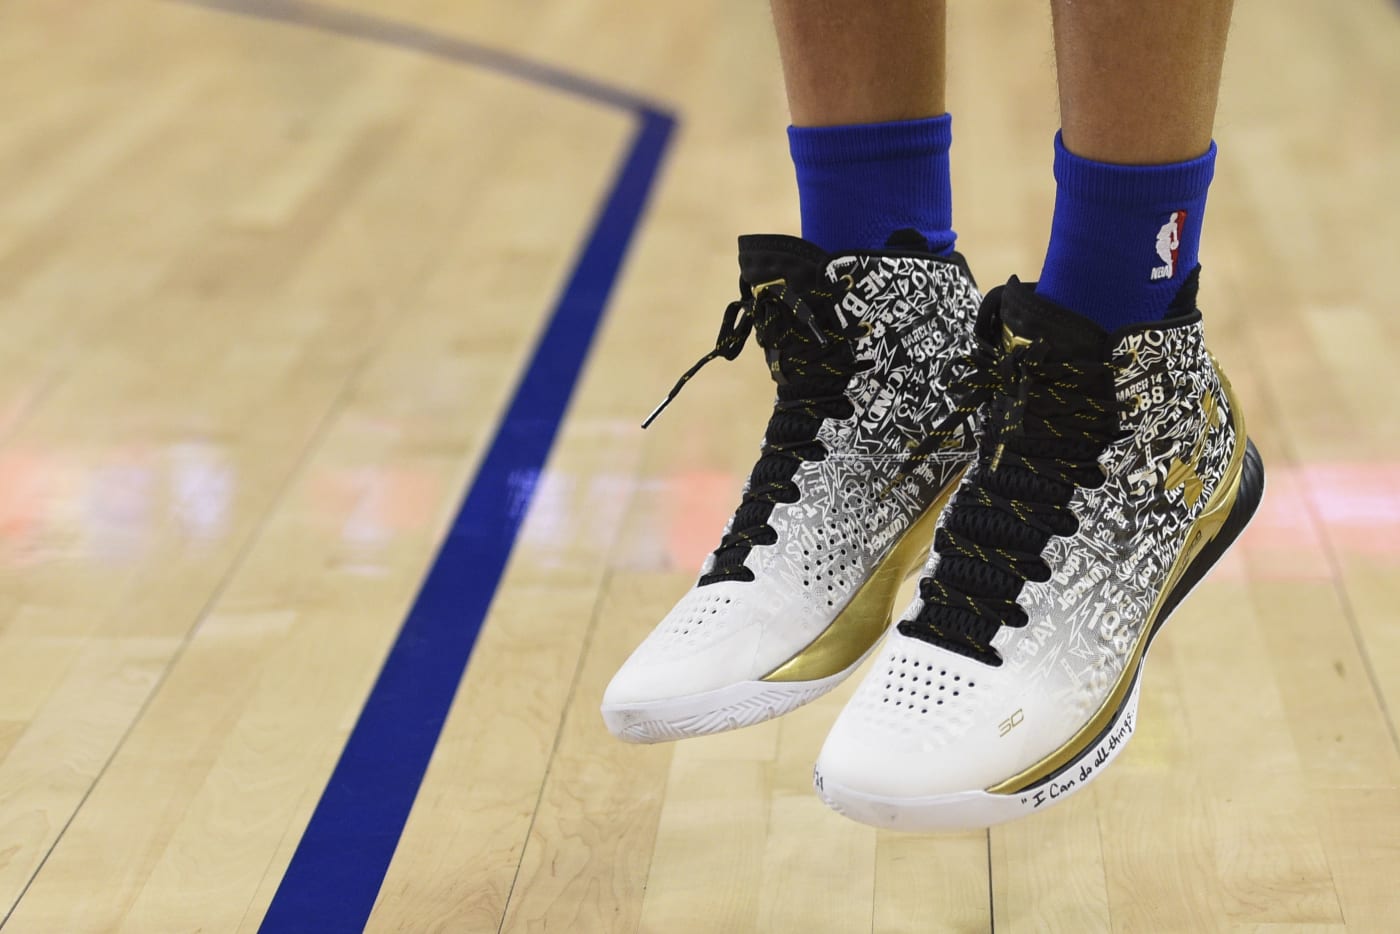 Under Armour Made History with Steph Curry...Now What? Complex